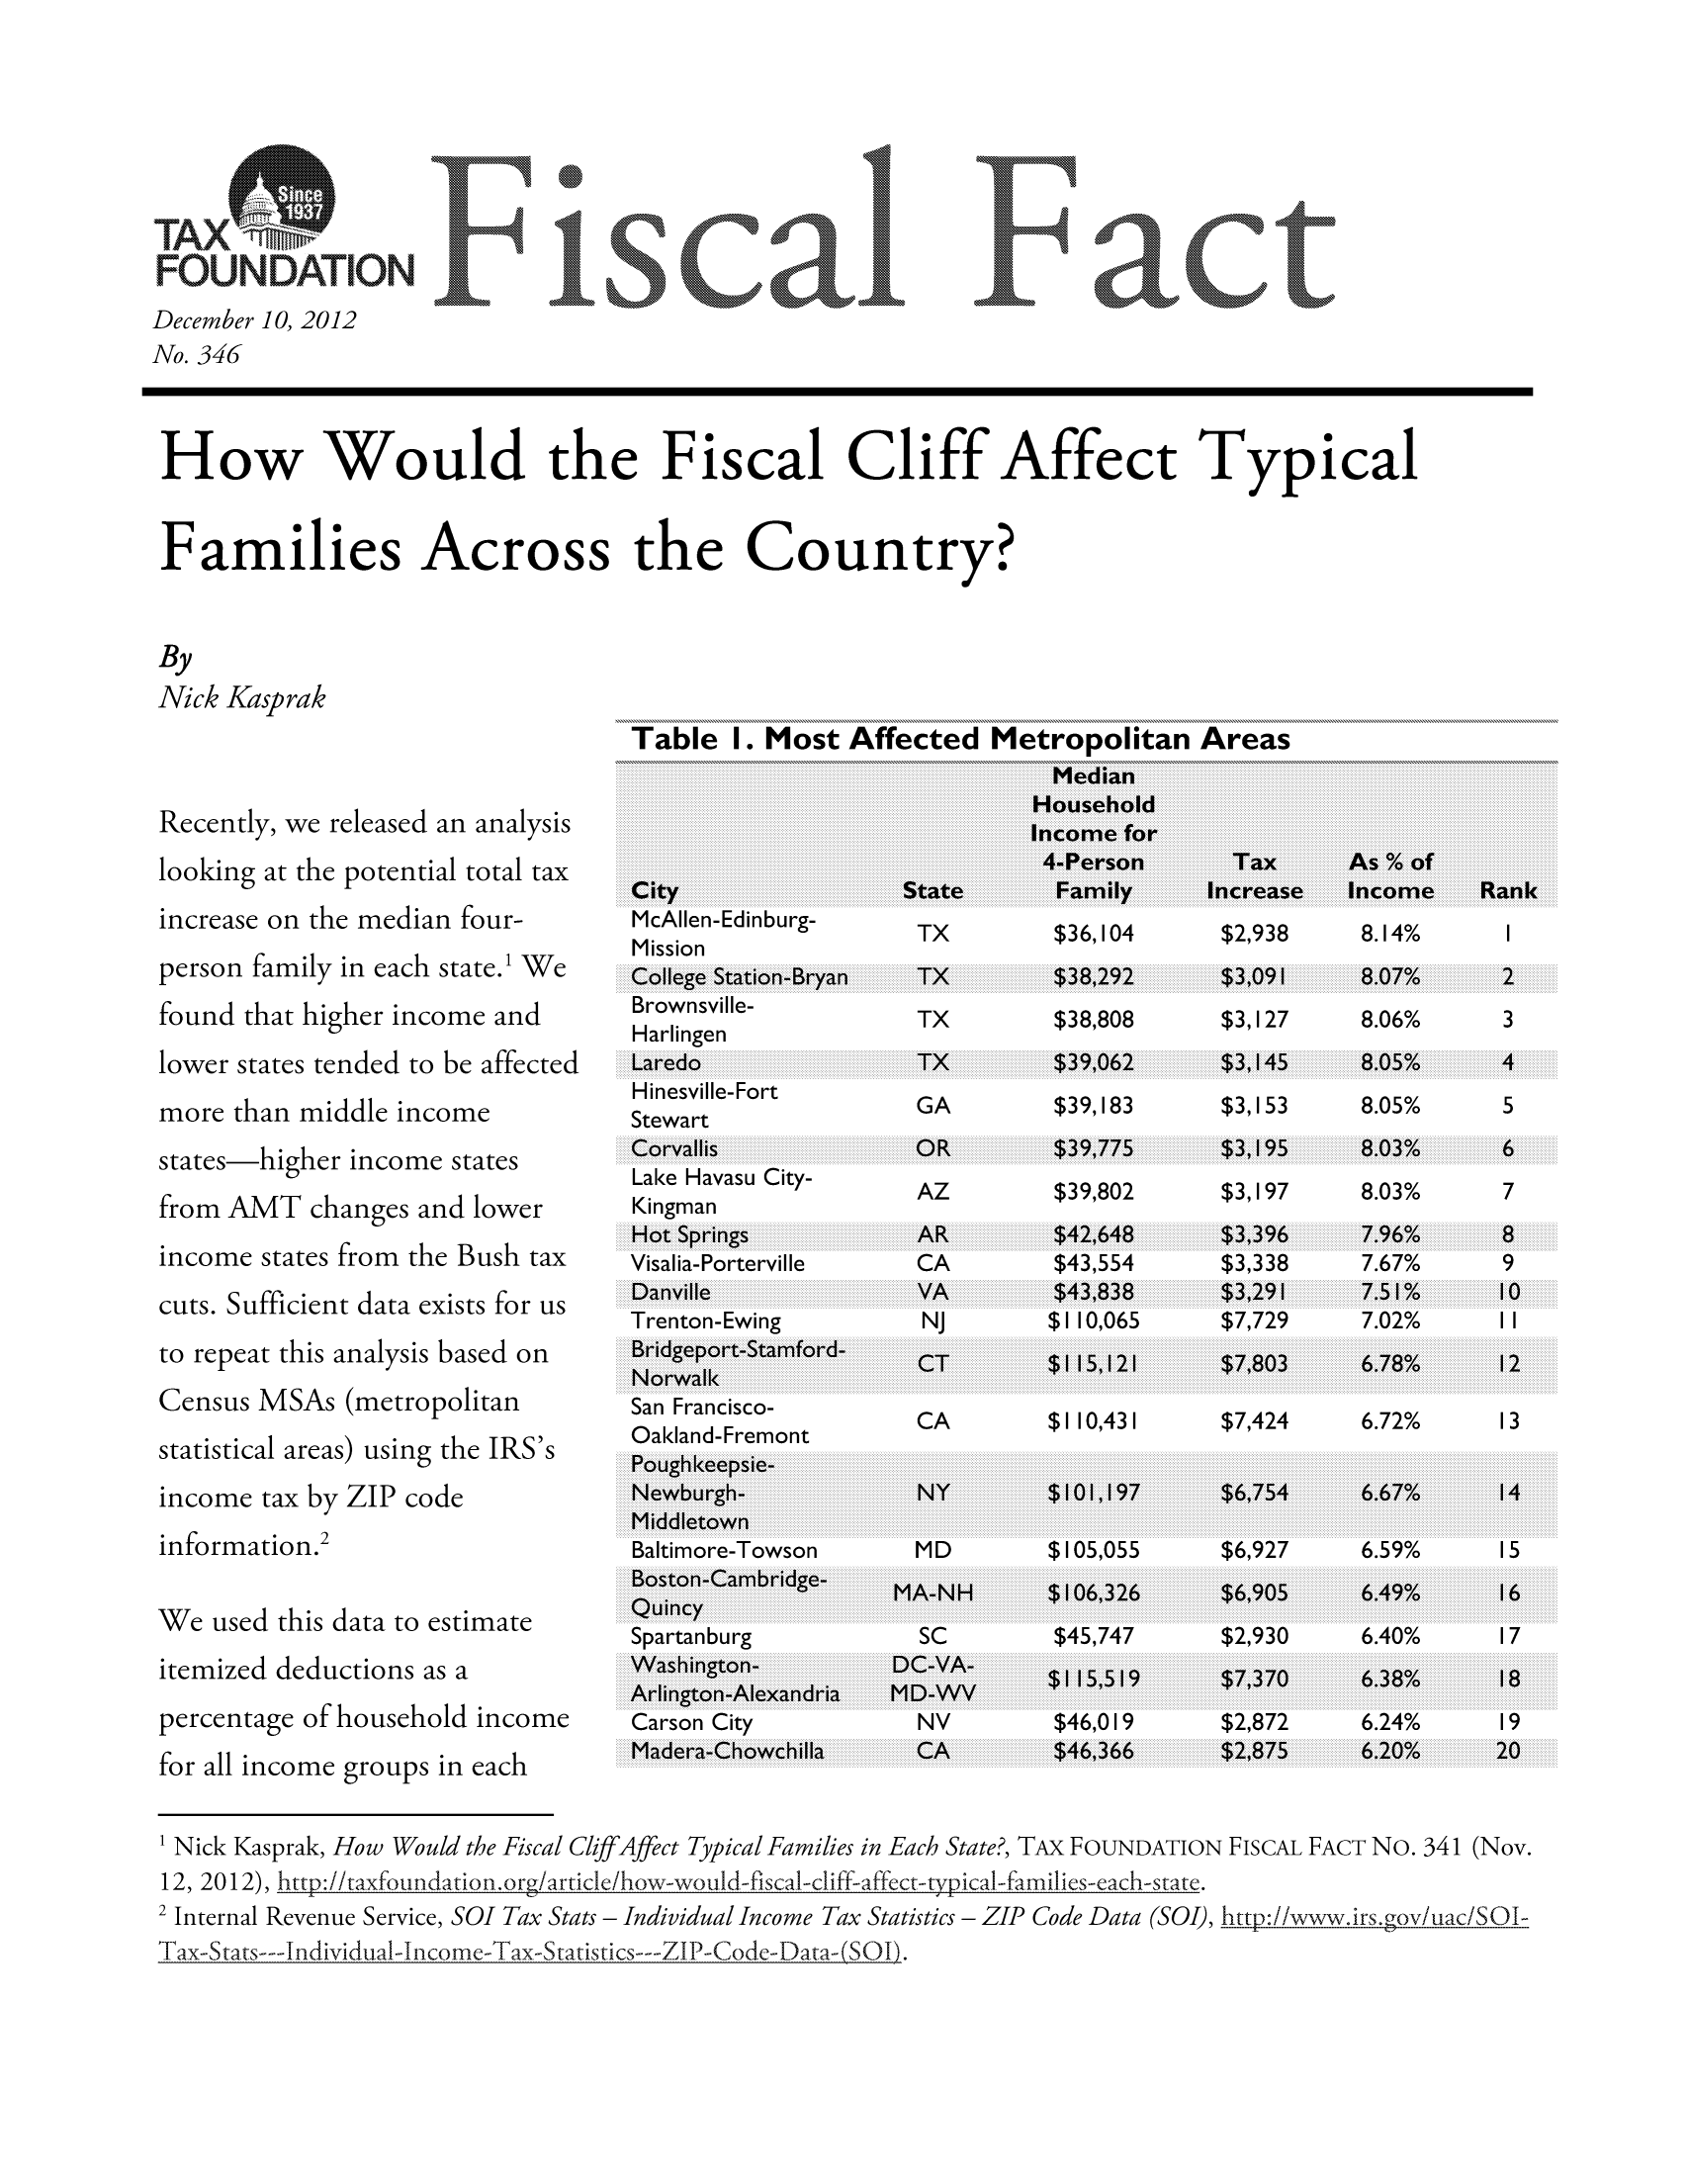 handle is hein.taxfoundation/ffdegxz0001 and id is 1 raw text is: December 10, 2012No. 346How Would the Fiscal Cliff Affect TypicalFamilies Across the Country?ByNick KasprakRecently, we released an analysislooking at the potential total taxincrease on the median four-person family in each state.1 Wefound that higher income andlower states tended to be affectedmore than middle incomestates-higher income statesfrom AMT changes and lowerincome states from the Bush taxcuts. Sufficient data exists for usto repeat this analysis based onCensus MSAs (metropolitanstatistical areas) using the IRS'sincome tax by ZIP codeinformation2We used this data to estimateitemized deductions as apercentage of household incomefor all income groups in eachTable I. Most Affected Metropolitan AreasrI c/xIIen-tainD.1rlIu  g-MissionCollege Station-BryanBrownsville-HarlingenLaredoHinesville-FortStewartCorvallisLake Havasu City-KingmanHot SpringsVisalia-PortervilleDanvilleTrenton-EwingBridgeport-Stamford-NorwalkSan Francisco-Oakland-FremontTXTXTXTXGAORAZARCAVA$36,104$38,292$38,808$39,062$3%183$39,775$39,802$42,648$43,554$43,838$1 10.065$2,938$3,091$3,127$3145$3,153$3,195$3,197$3,396$3,338$3,291$77298.14%8.07%8.06%8.05%8.05%8.03%8.03%7.96%7.67%7.51%7.02%CA         $110,431     $7,424      6.72%     13Madera-Chowchilla       CA         $46,366pLO L     O.Lt7o$2,875    6.20%1 Nick Kasprak, How Would the Fiscal CliffAffect Typical Families in Each State?, TAX FOUNDATION FISCAL FACT No. 341 (Nov.12, 2012), http://taxfoundation.org/a'rticle/how-wot.u1d-fi.sca.-cliff-affect-typical-ftamil ies-each-state.2 Internal Revenue Service, SOI Tax Stats- Individual Income Tax Statistics- ZIP Code Data (SOI), http://www.irs.gov/uac/SOI-Tax-S tats --- I ndividual- I nco me-'Tax- Statis tics --- ZI P- Co de- D ata- (SO I).123456789I0II20